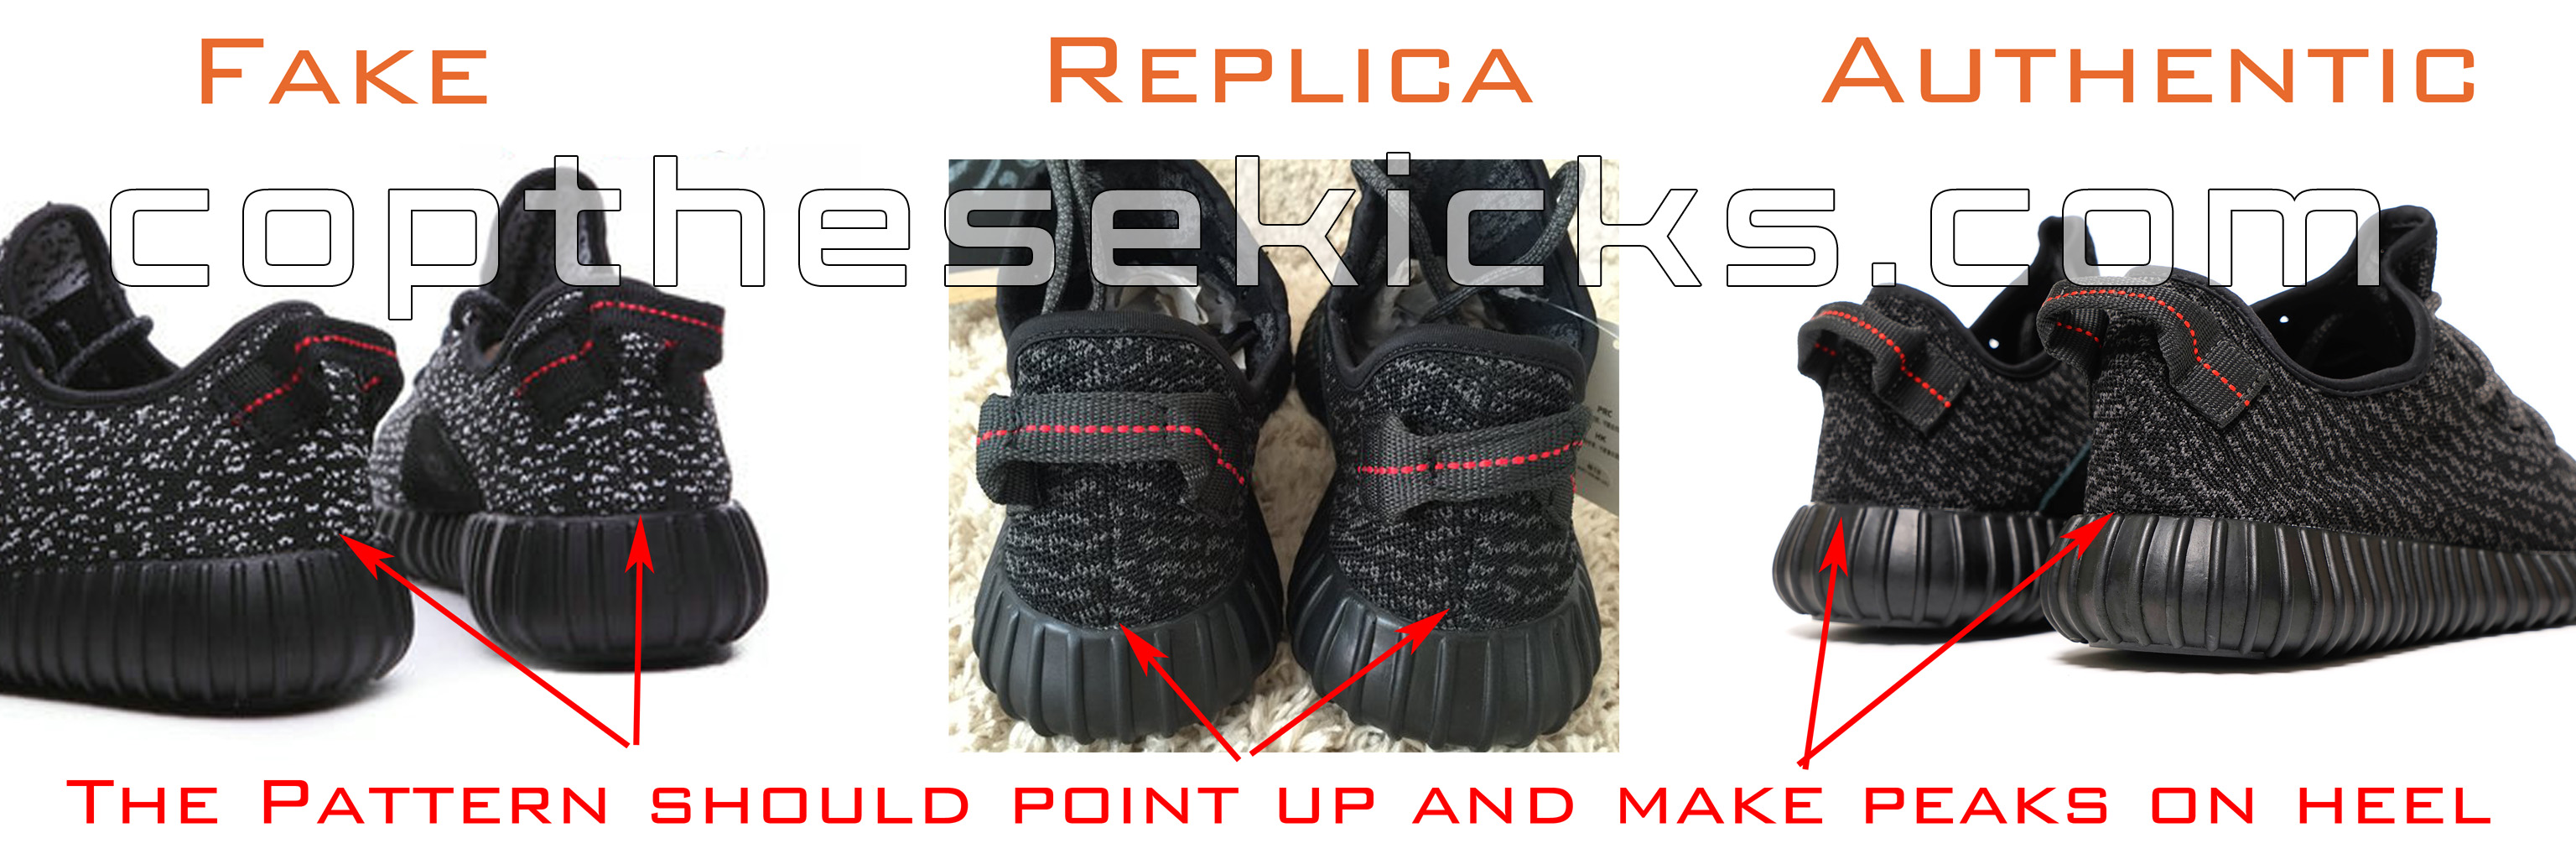 adidas yeezy boost 350 pirate black real vs fake